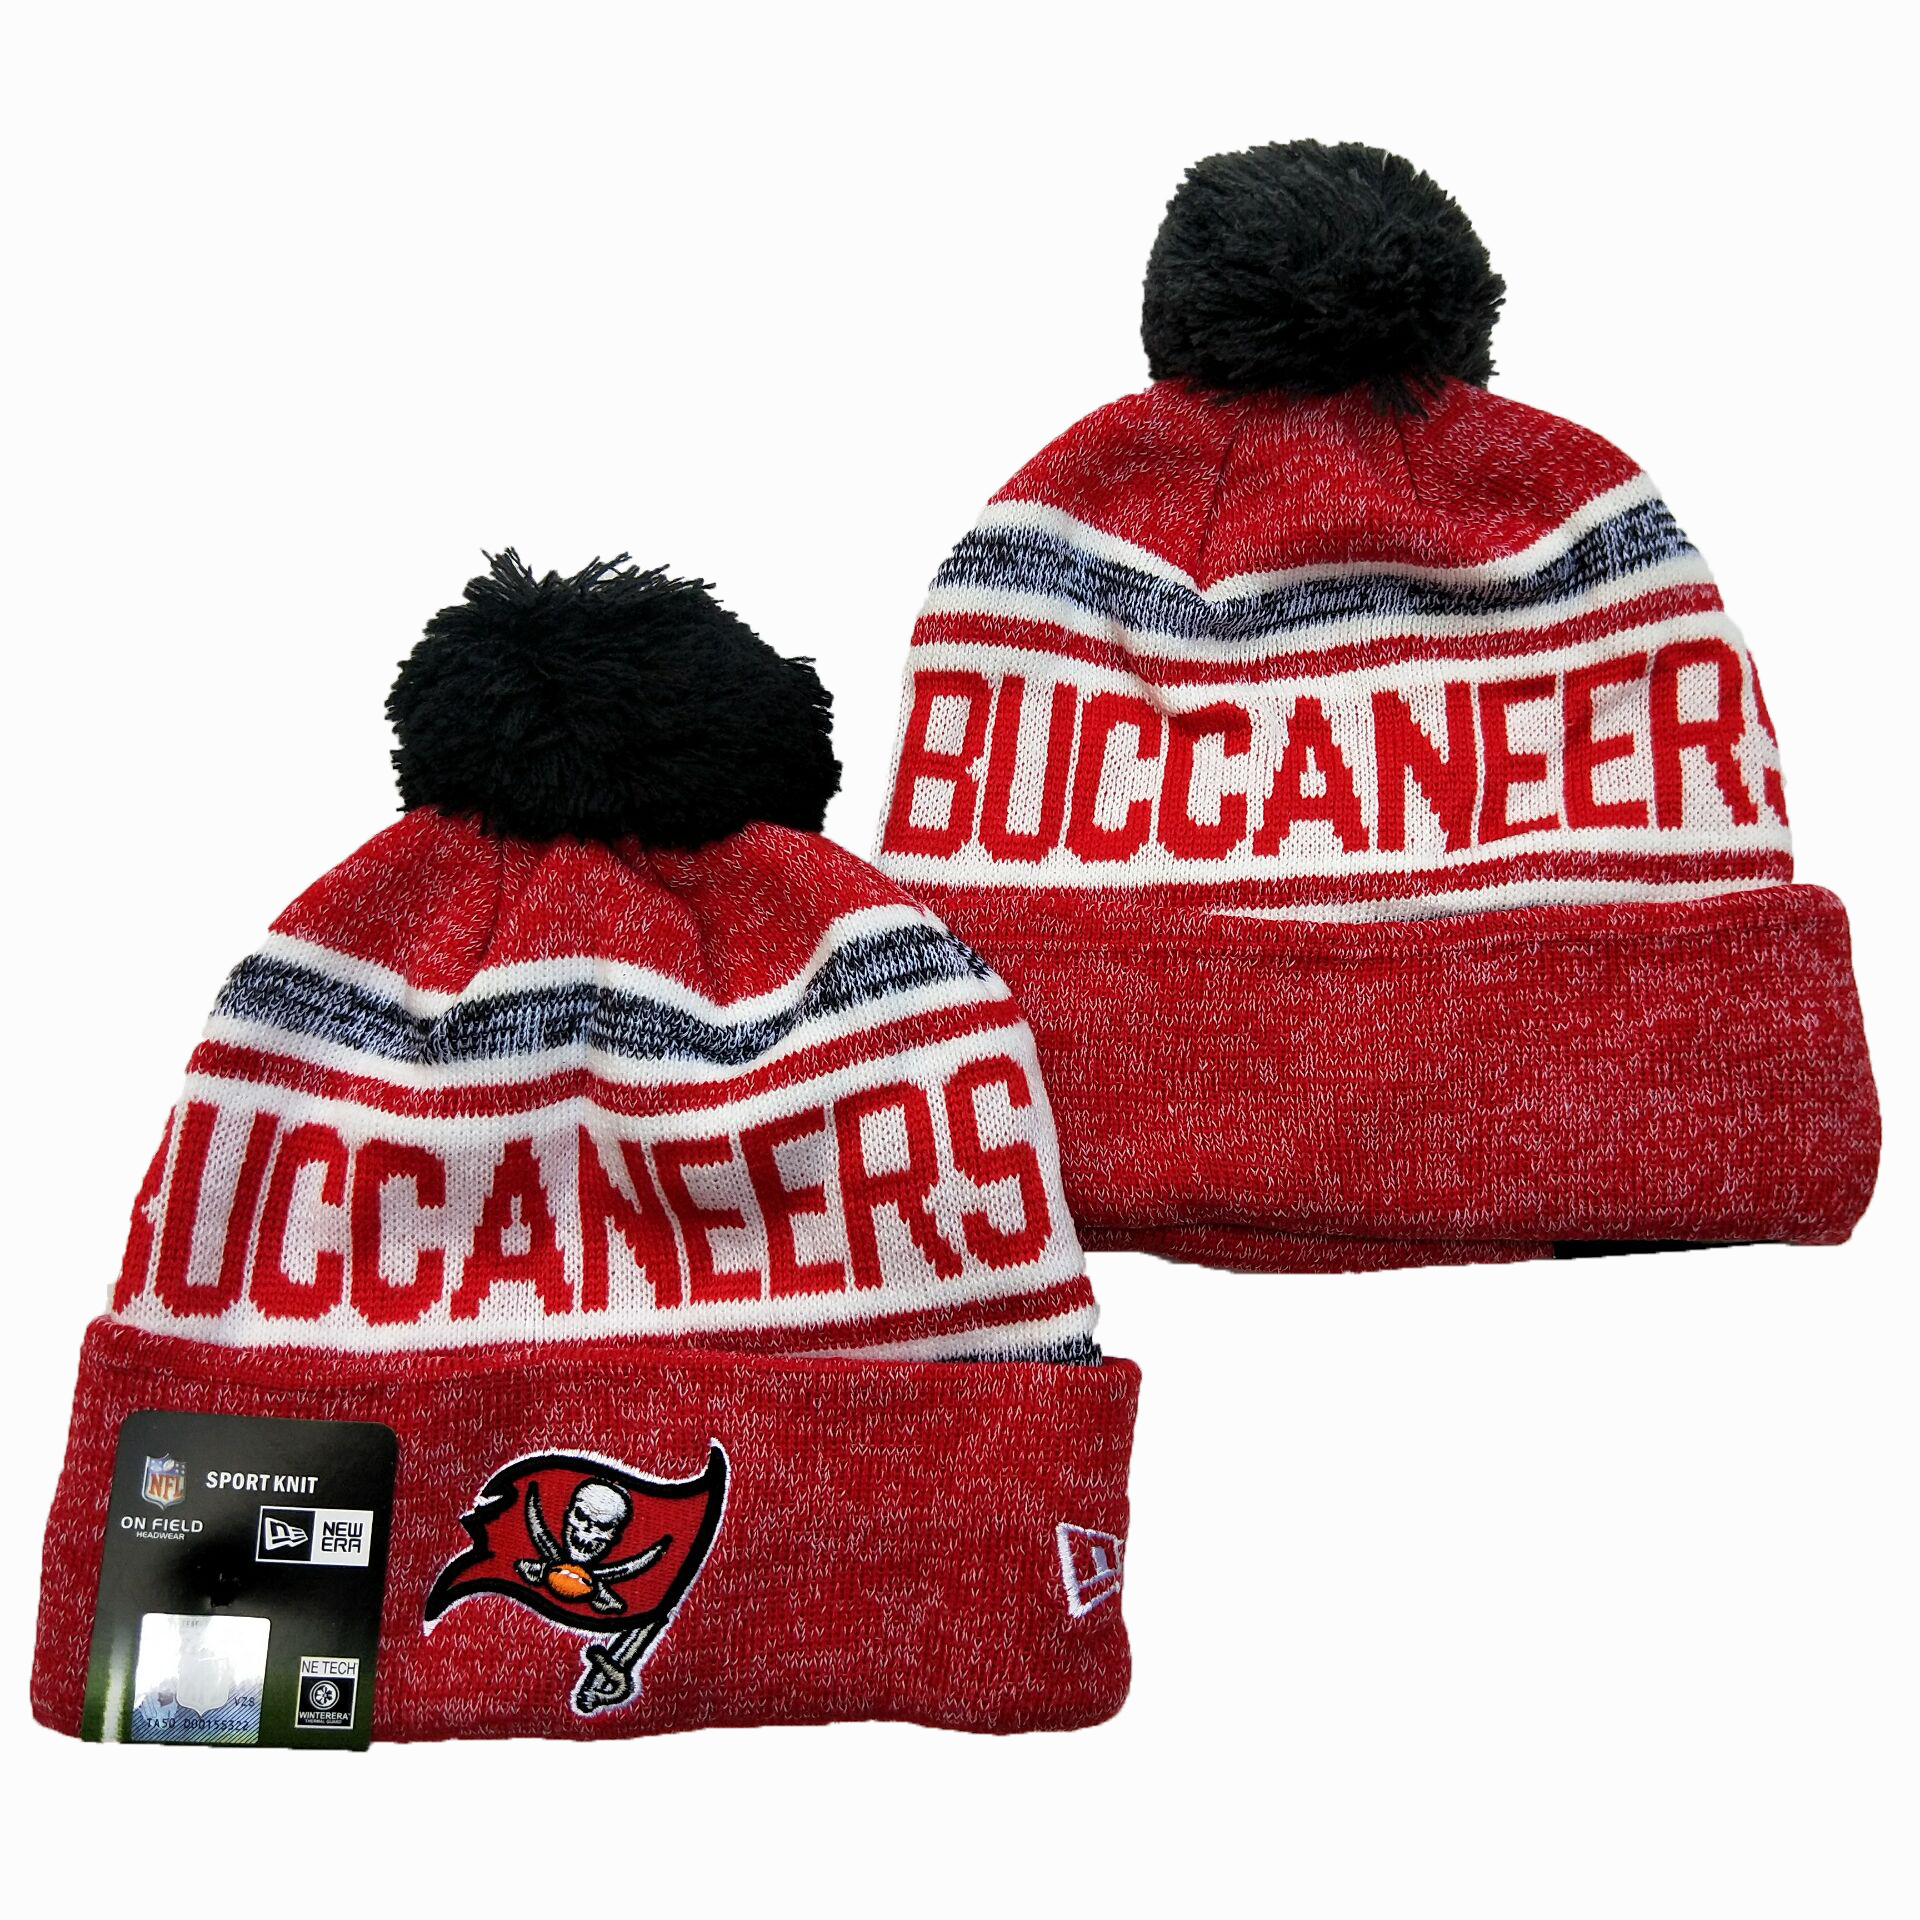 Tampa Bay Buccaneers Knit Hats 026